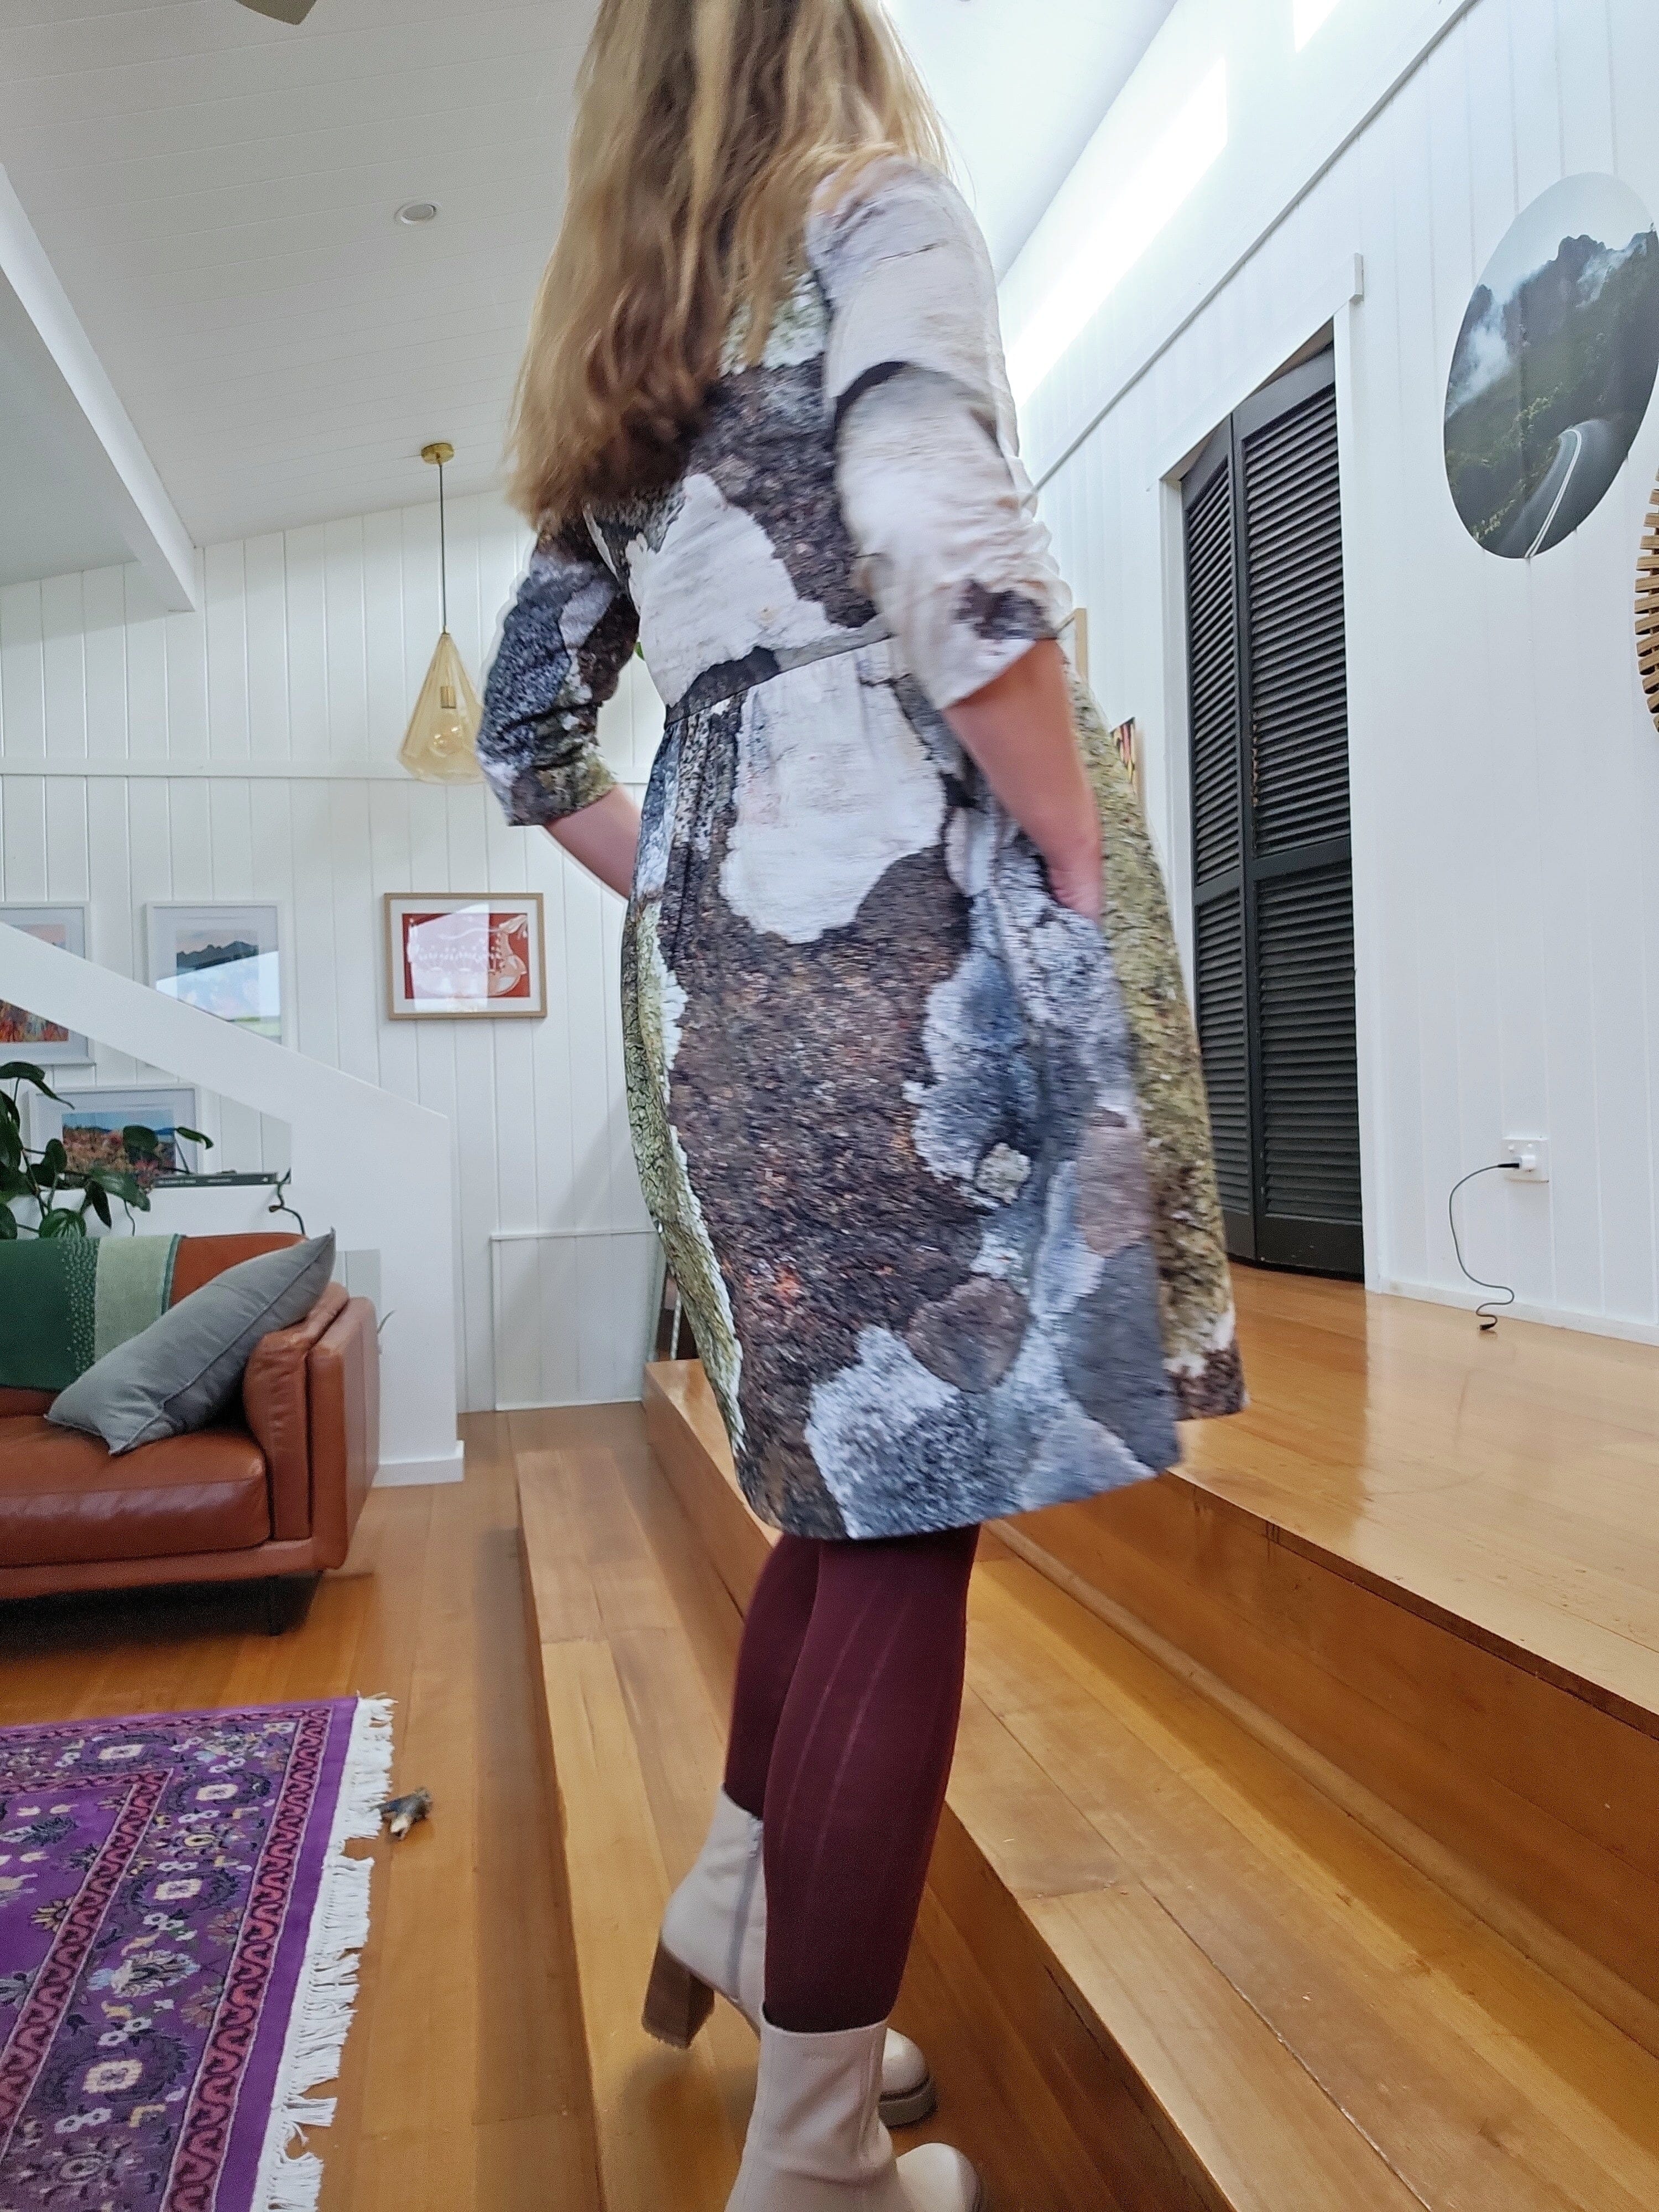 Peasant Dress 3/4 sleeves - Cool Climate Lichen Dresses The Spotted Quoll 